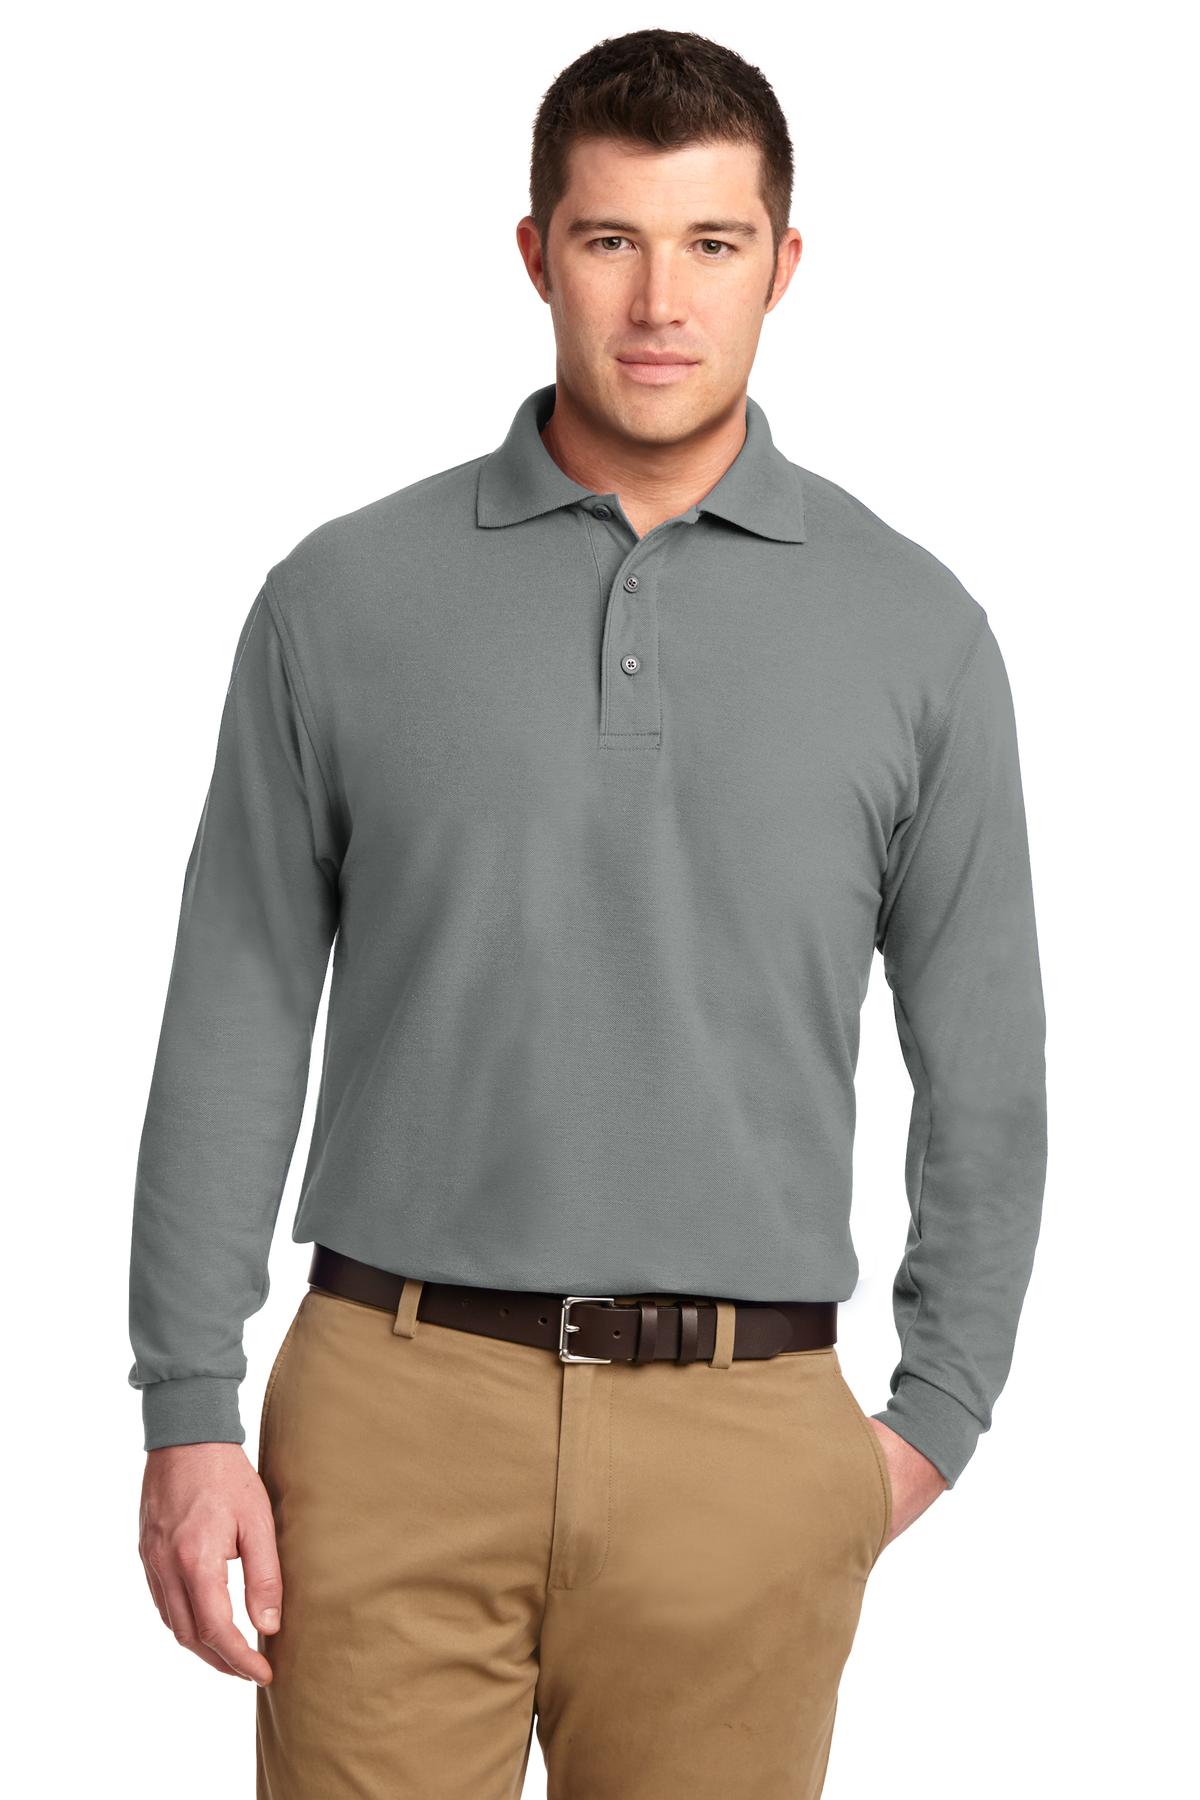 Polos/Knits Cool Grey Port Authority